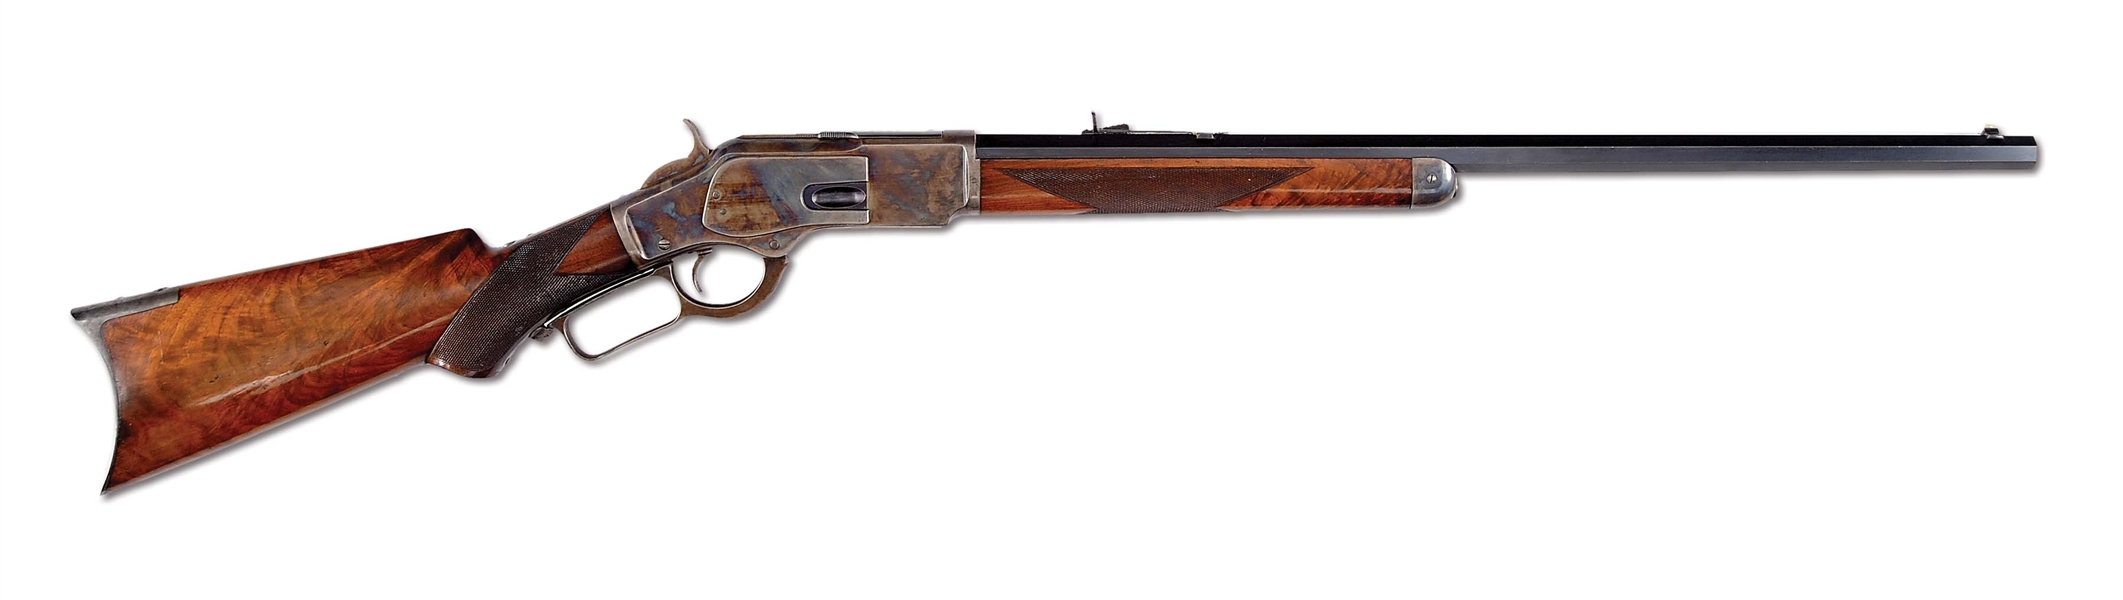 (A) SUPERIOR DOCUMENTED WINCHESTER MODEL 1873 PISTOL GRIP DELUXE RIFLE MARKED WITH XXXX GRADE (1883).